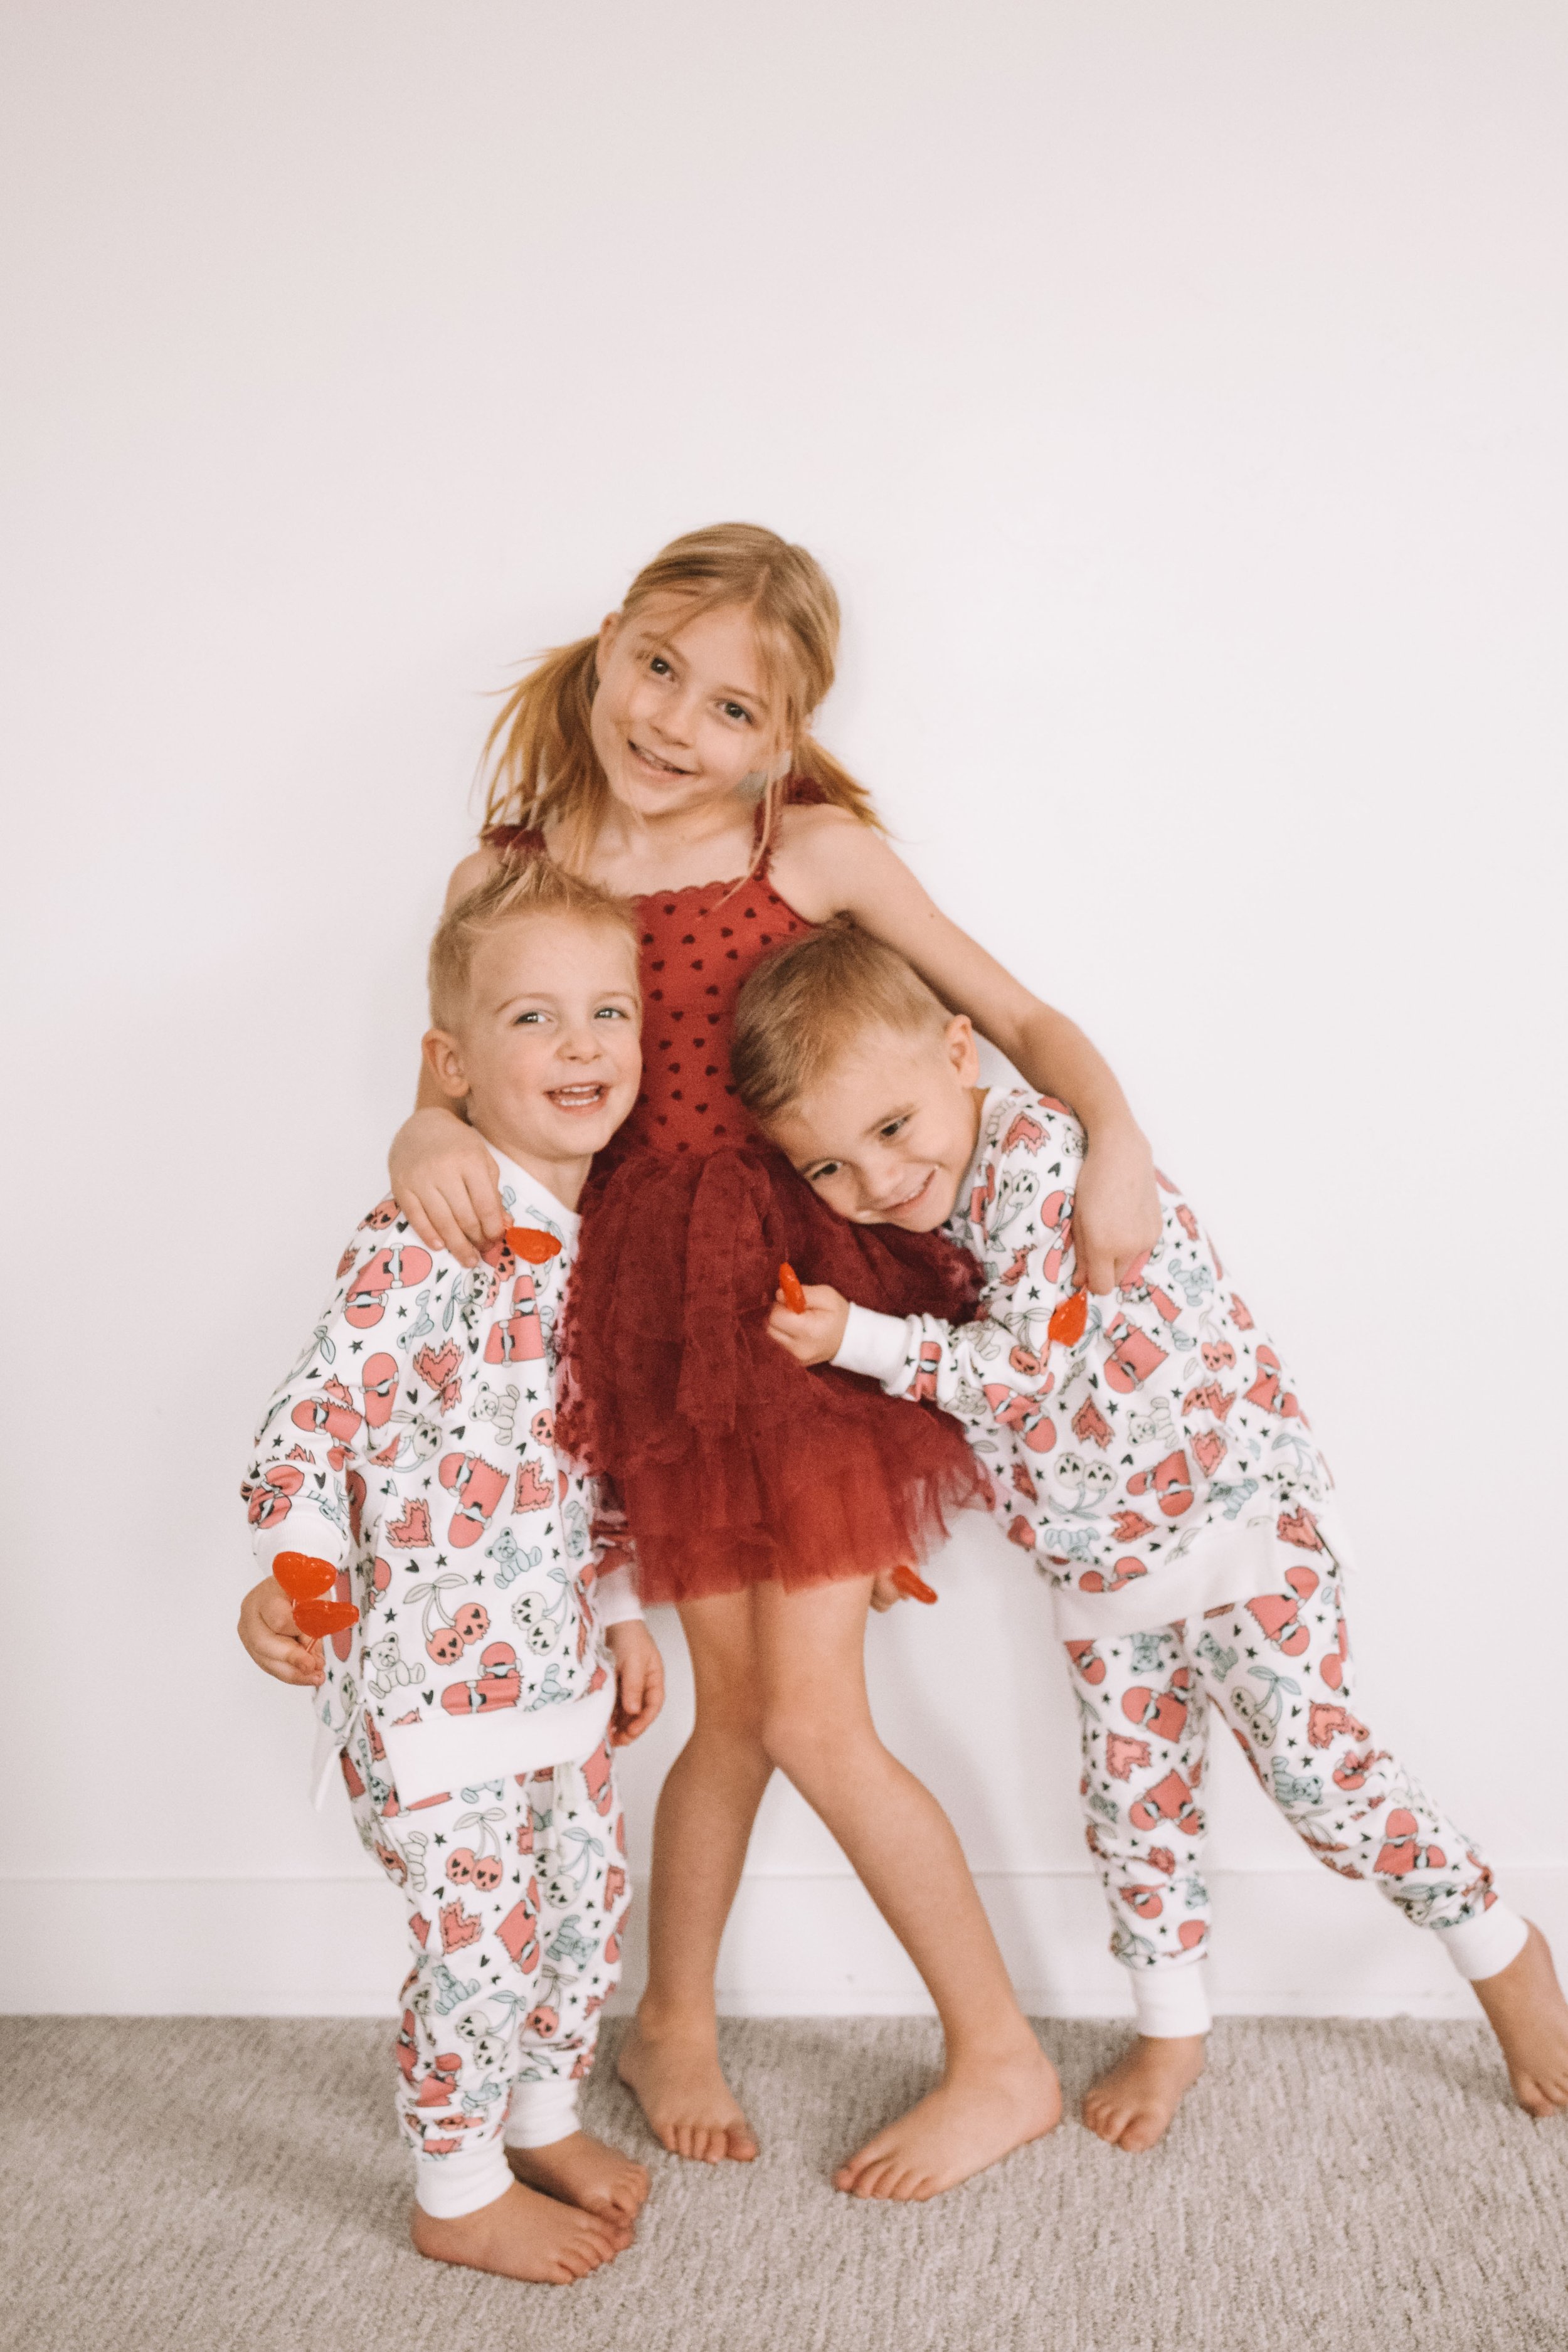 Kids Valentine's Day Sweatsuits &amp; Red Tutu - Bums &amp; Roses